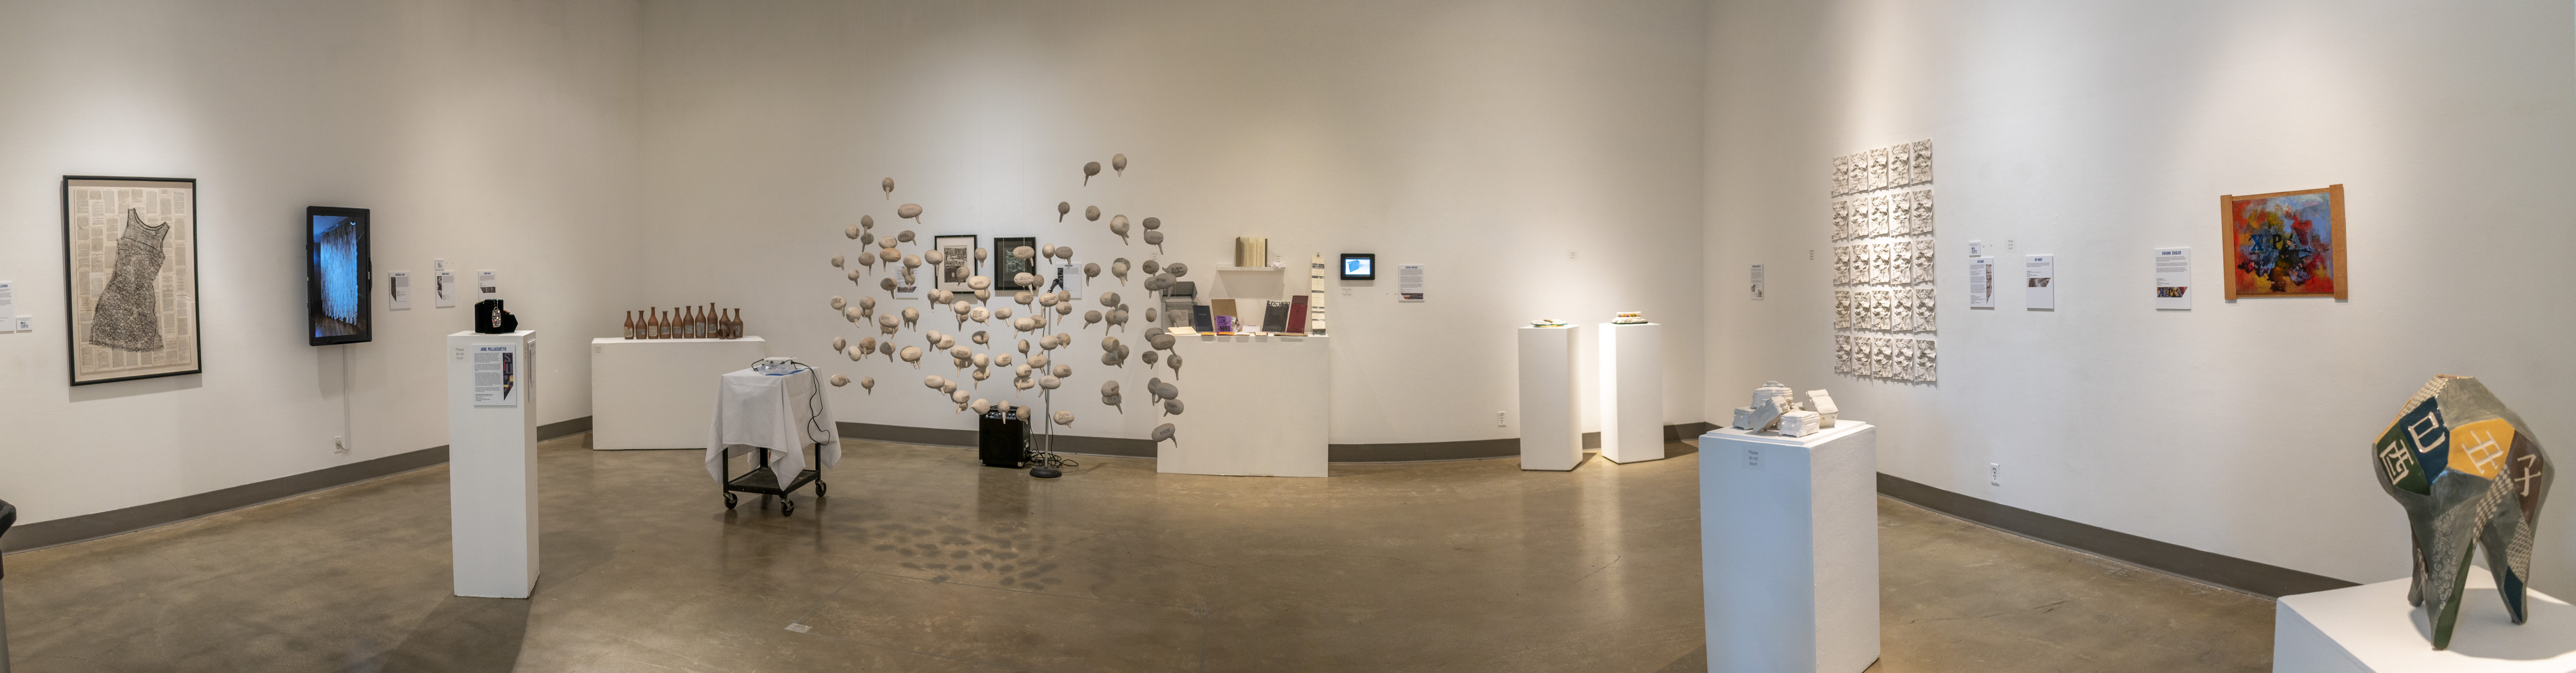 Installation View, East Gallery, Ink & Clay 45 Exhibition, August 18, 2022 to November 17, 2022